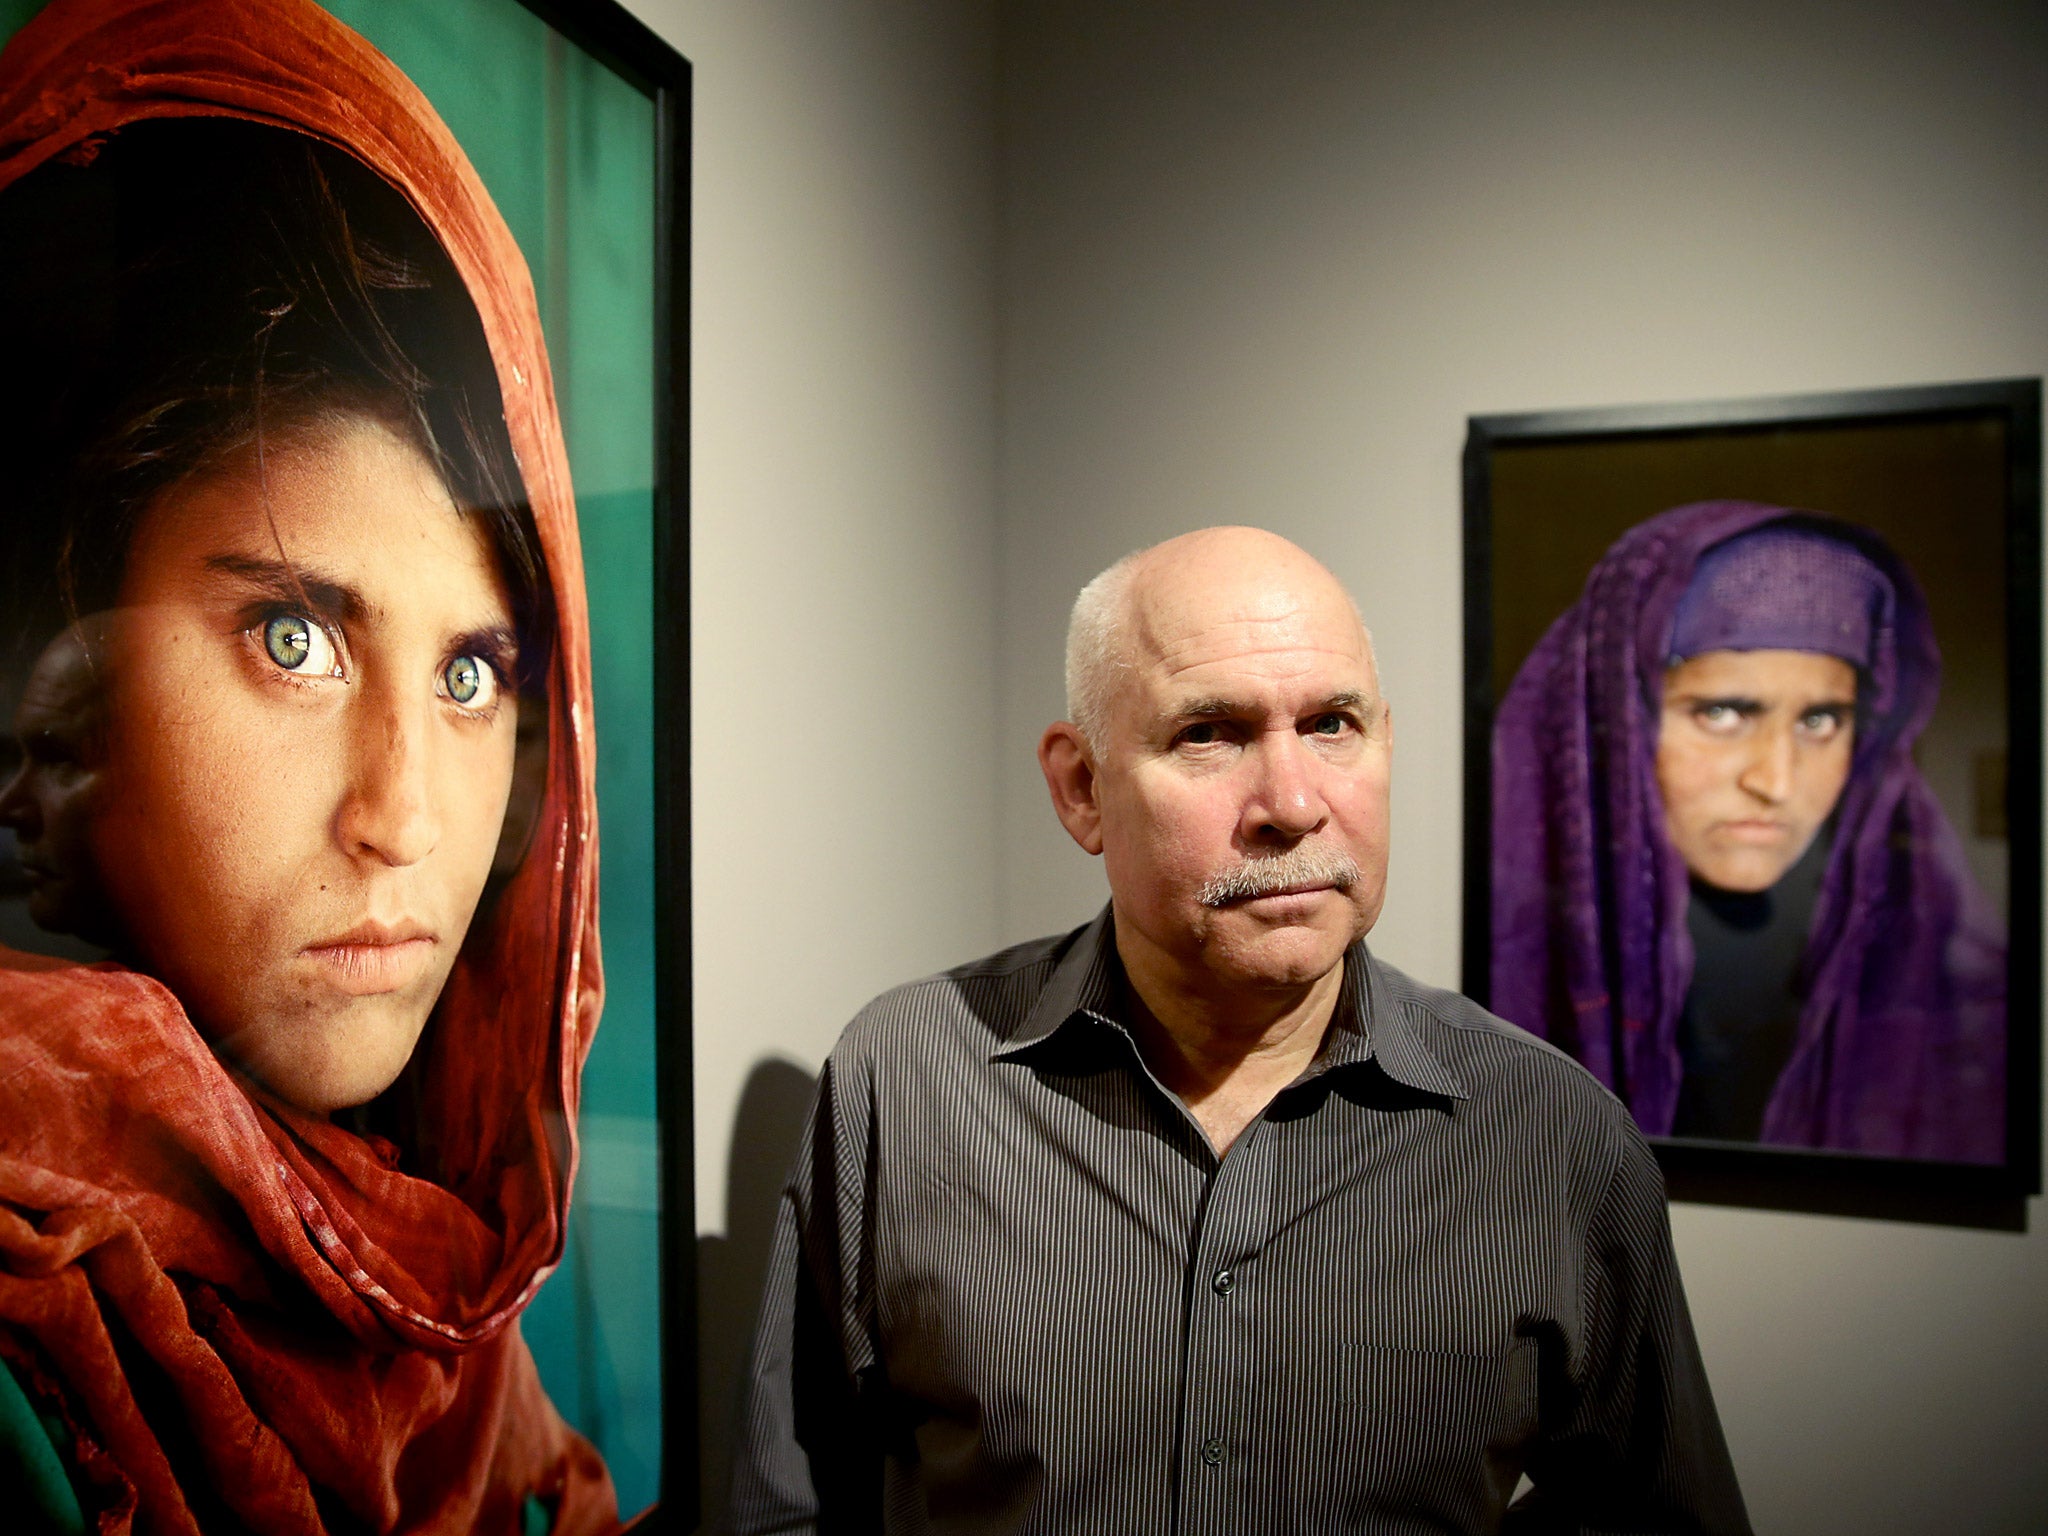 US photographer Steve McCurry poses next to his photos of the 'Afghan Girl' named Sharbat Gula at the opening of the 'Overwhelmed by Life' exhibition of his work